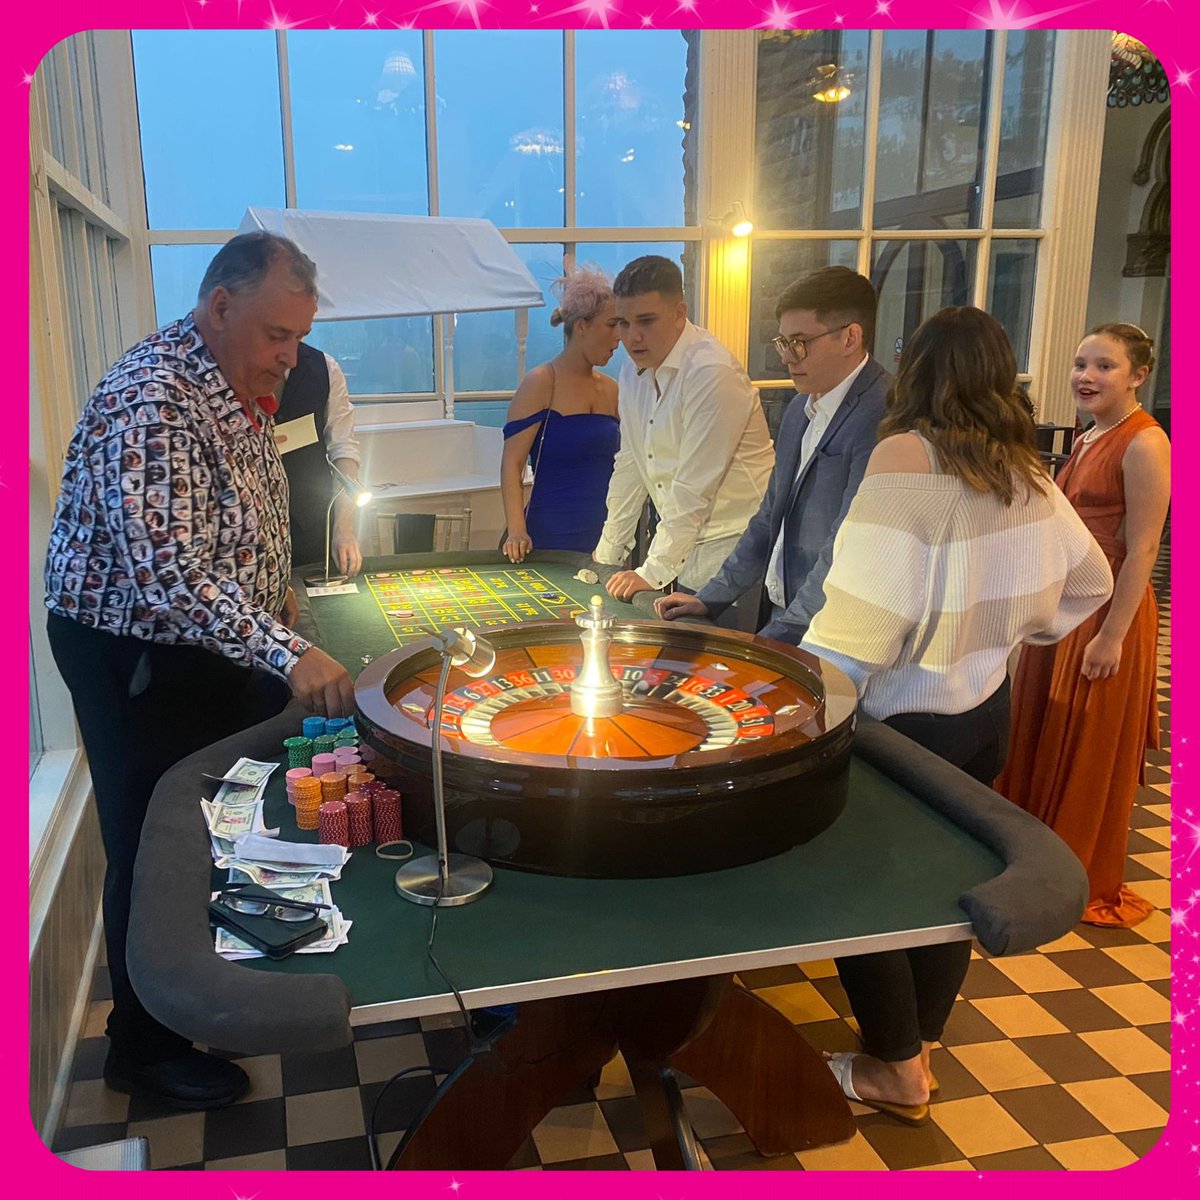 The 𝗦𝗲𝗹𝗳𝗶𝗲 𝗣𝗼𝗱 𝗮𝗻𝗱 𝗥𝗼𝘂𝗹𝗲𝘁𝘁𝗲 went down great at @RushpoolHall last weekend! Congratulations Mr & Mrs Finney! 🤩 #SelfiePod #Roulette #Photobooth #WeddingFun #EventEntertainment #PartyPerfection